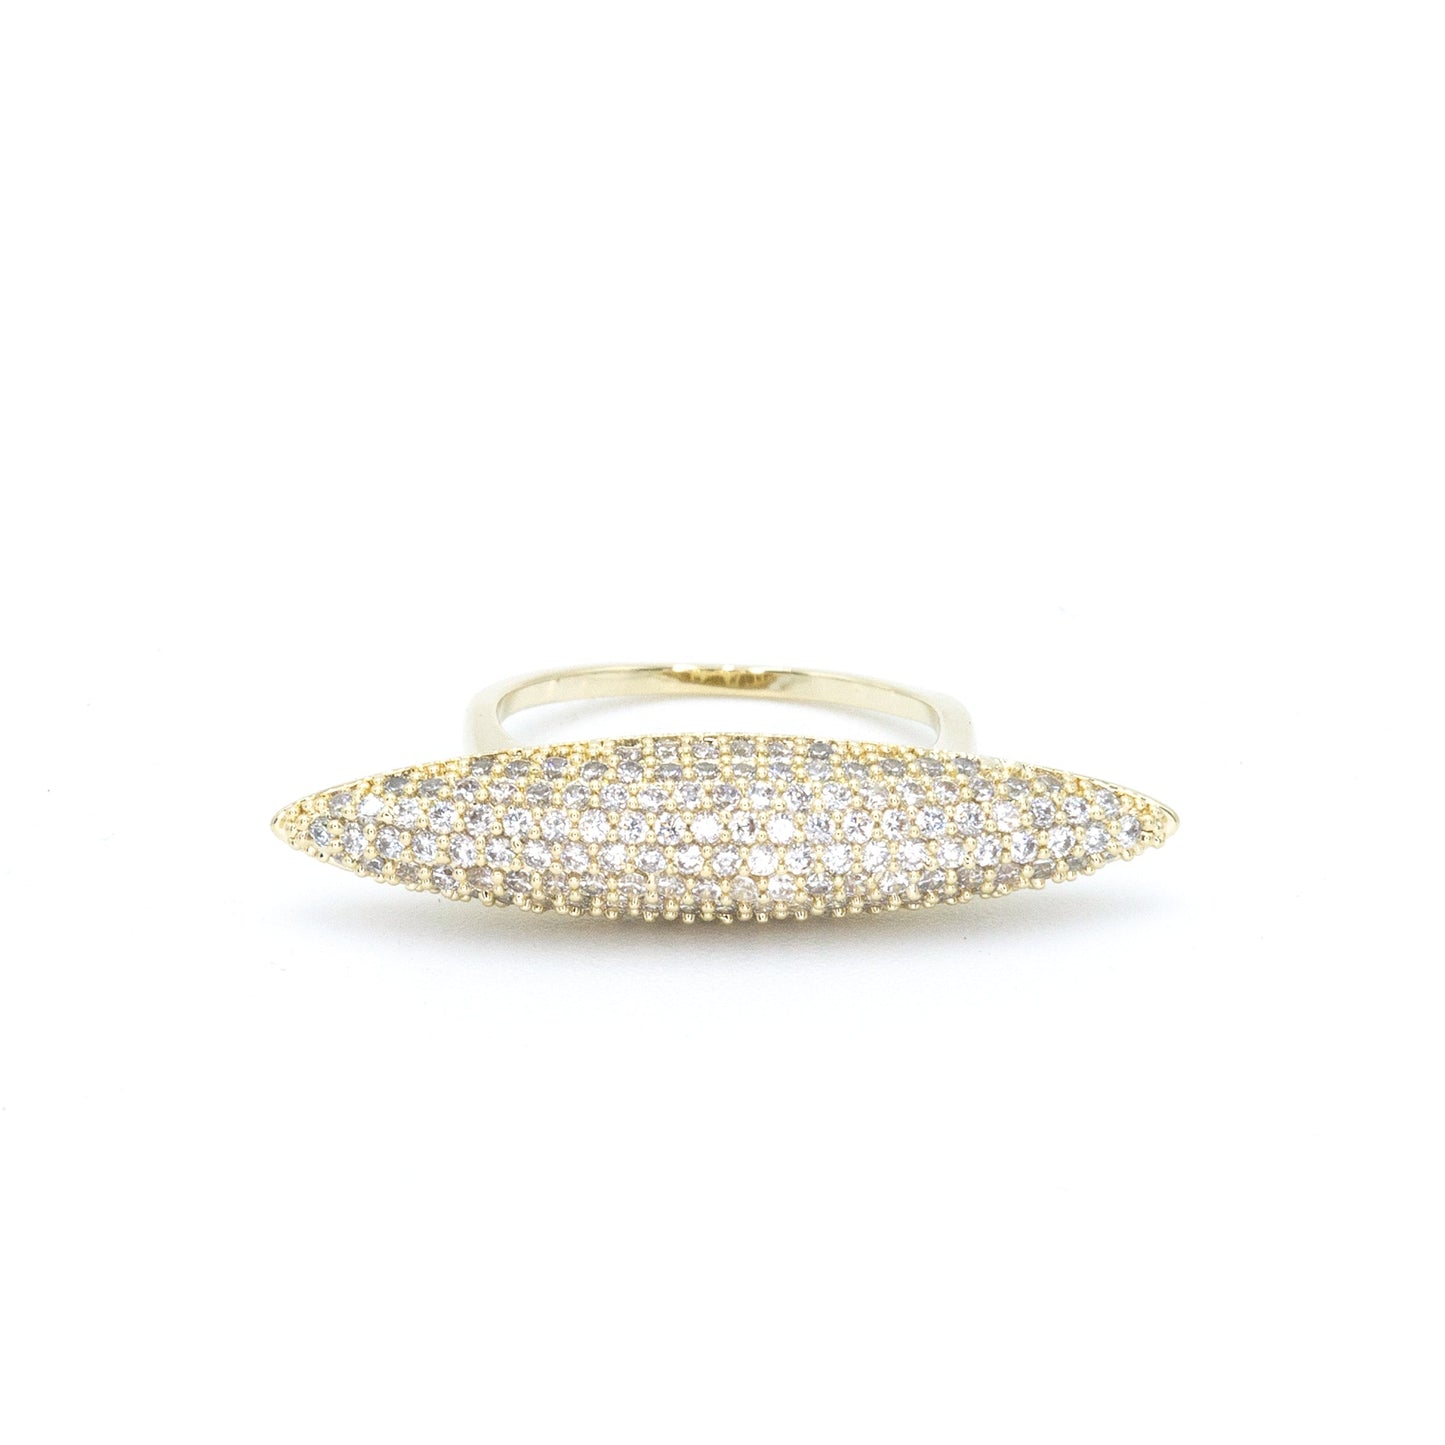 The Pave Diamond Shaped Ring